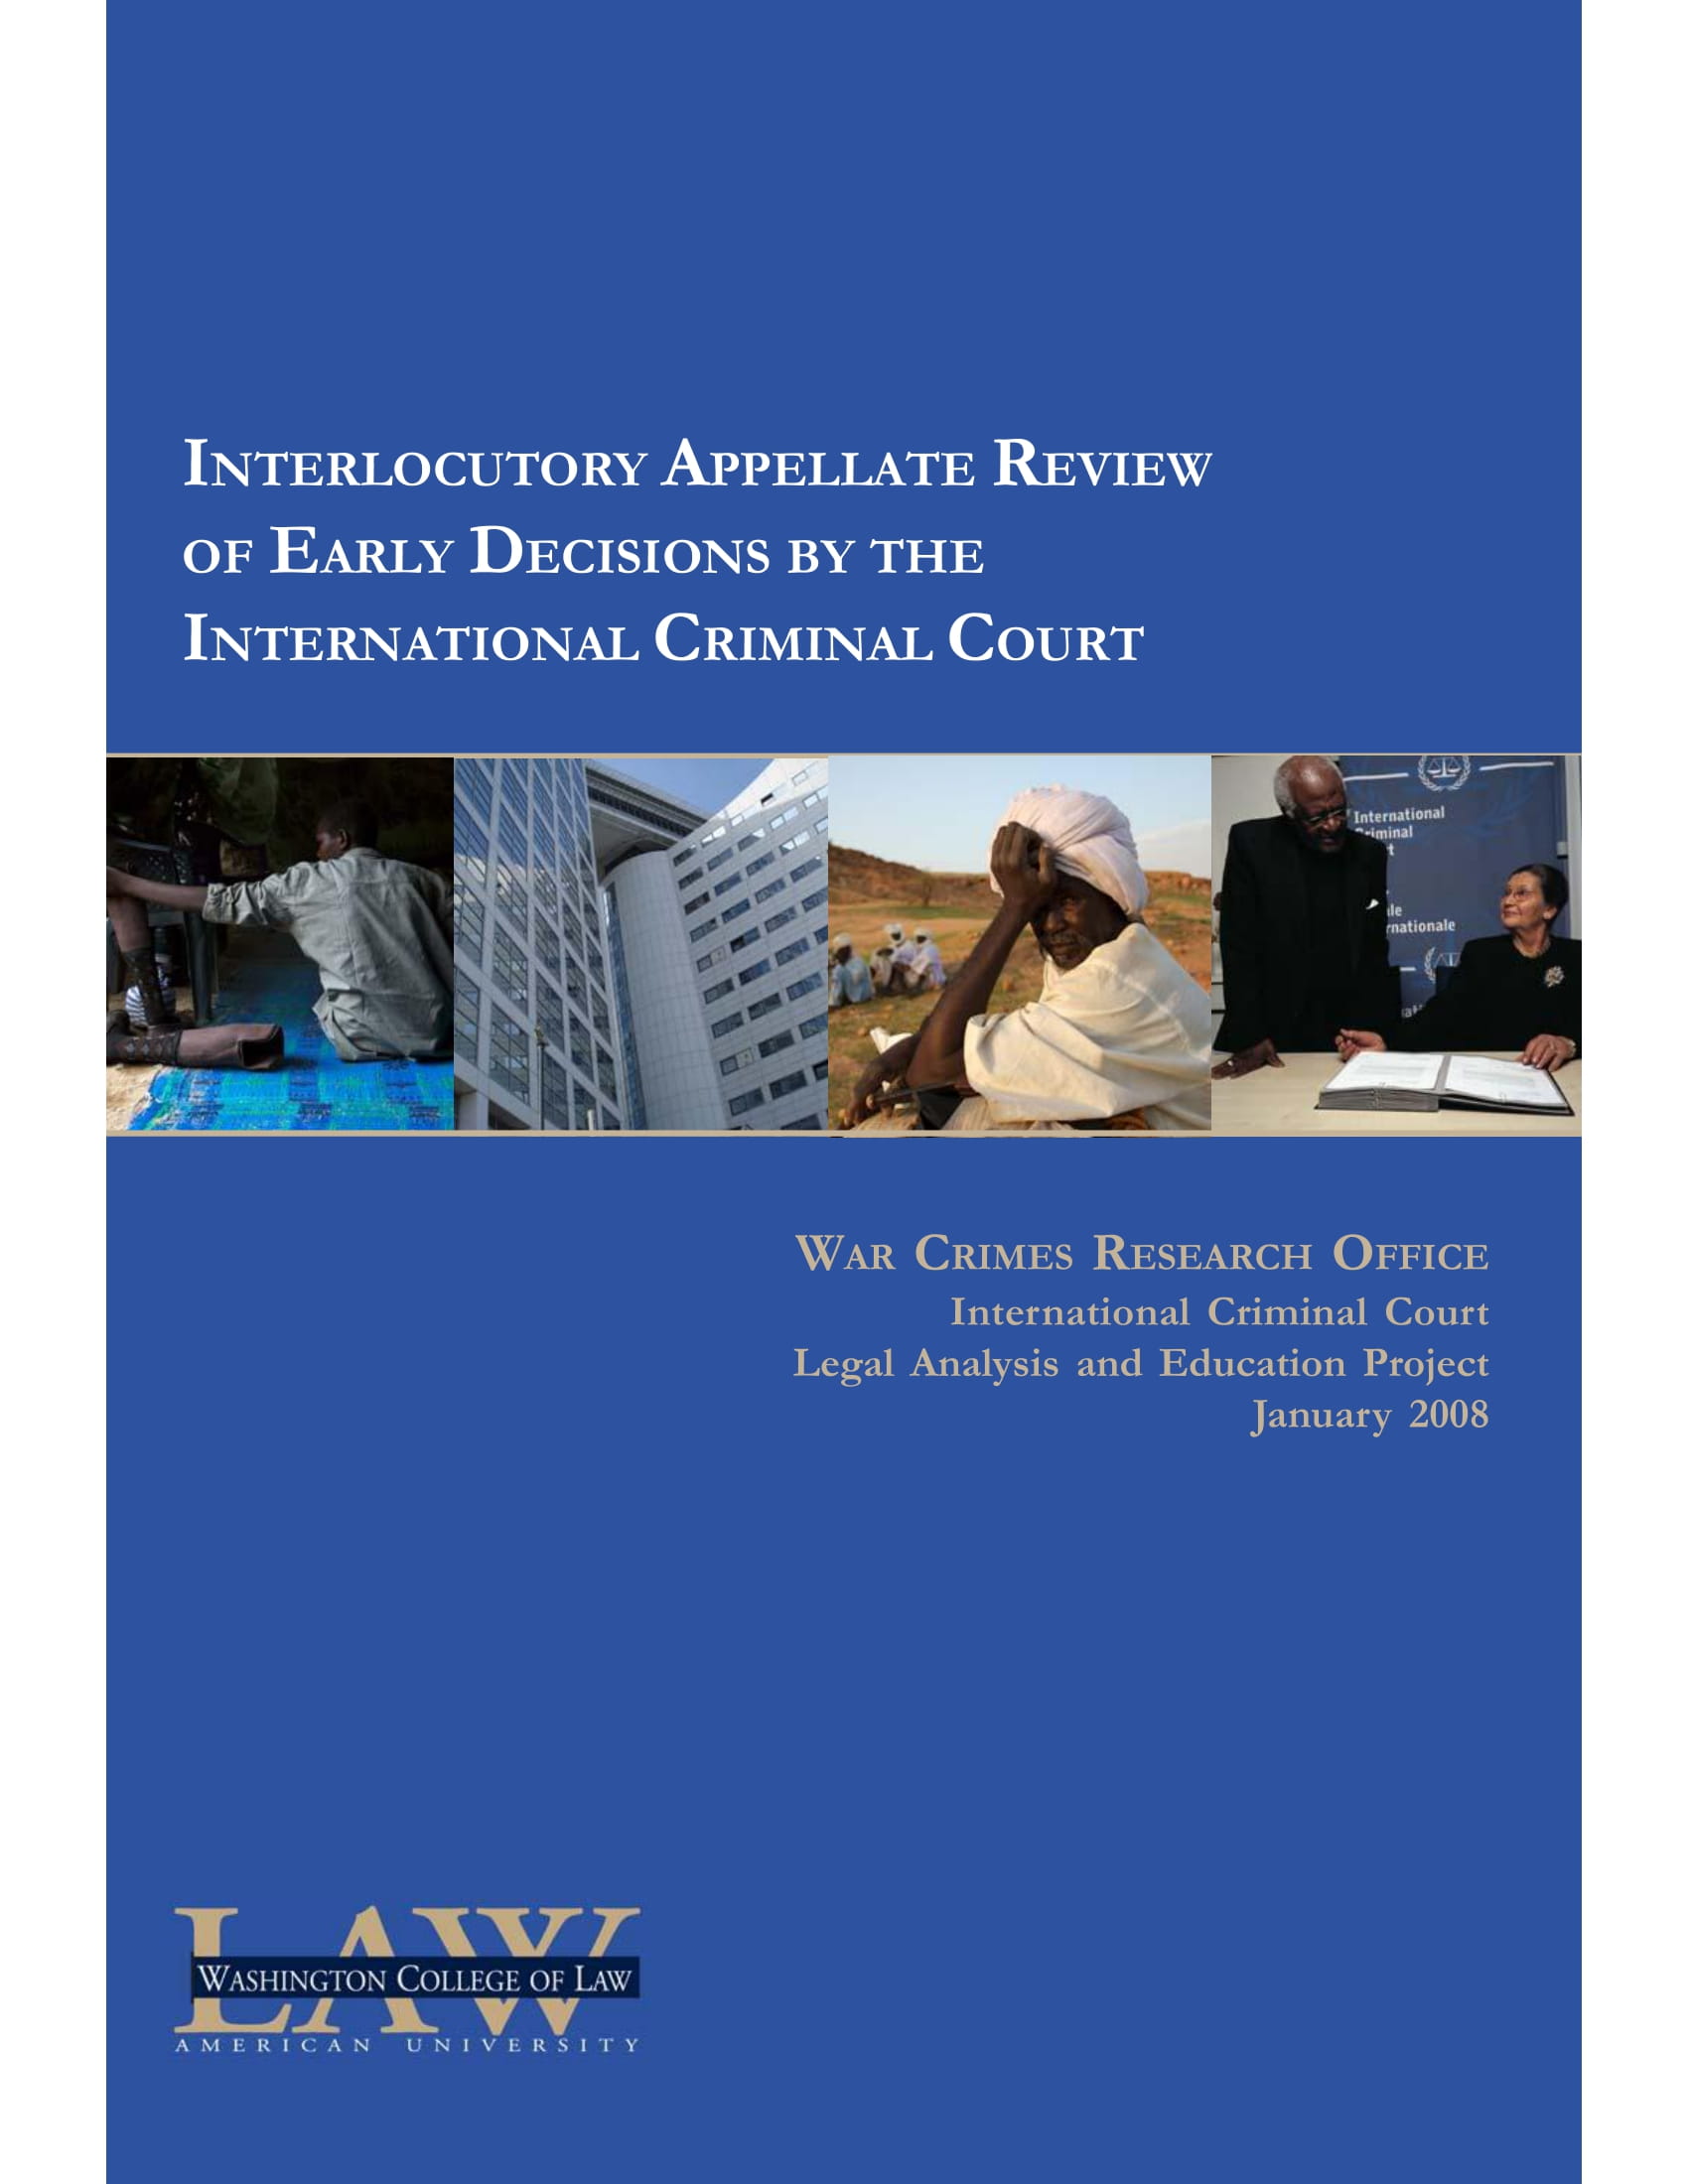 Report 2: Interlocutory Appellate Review of Early Decisions by the International Criminal Court